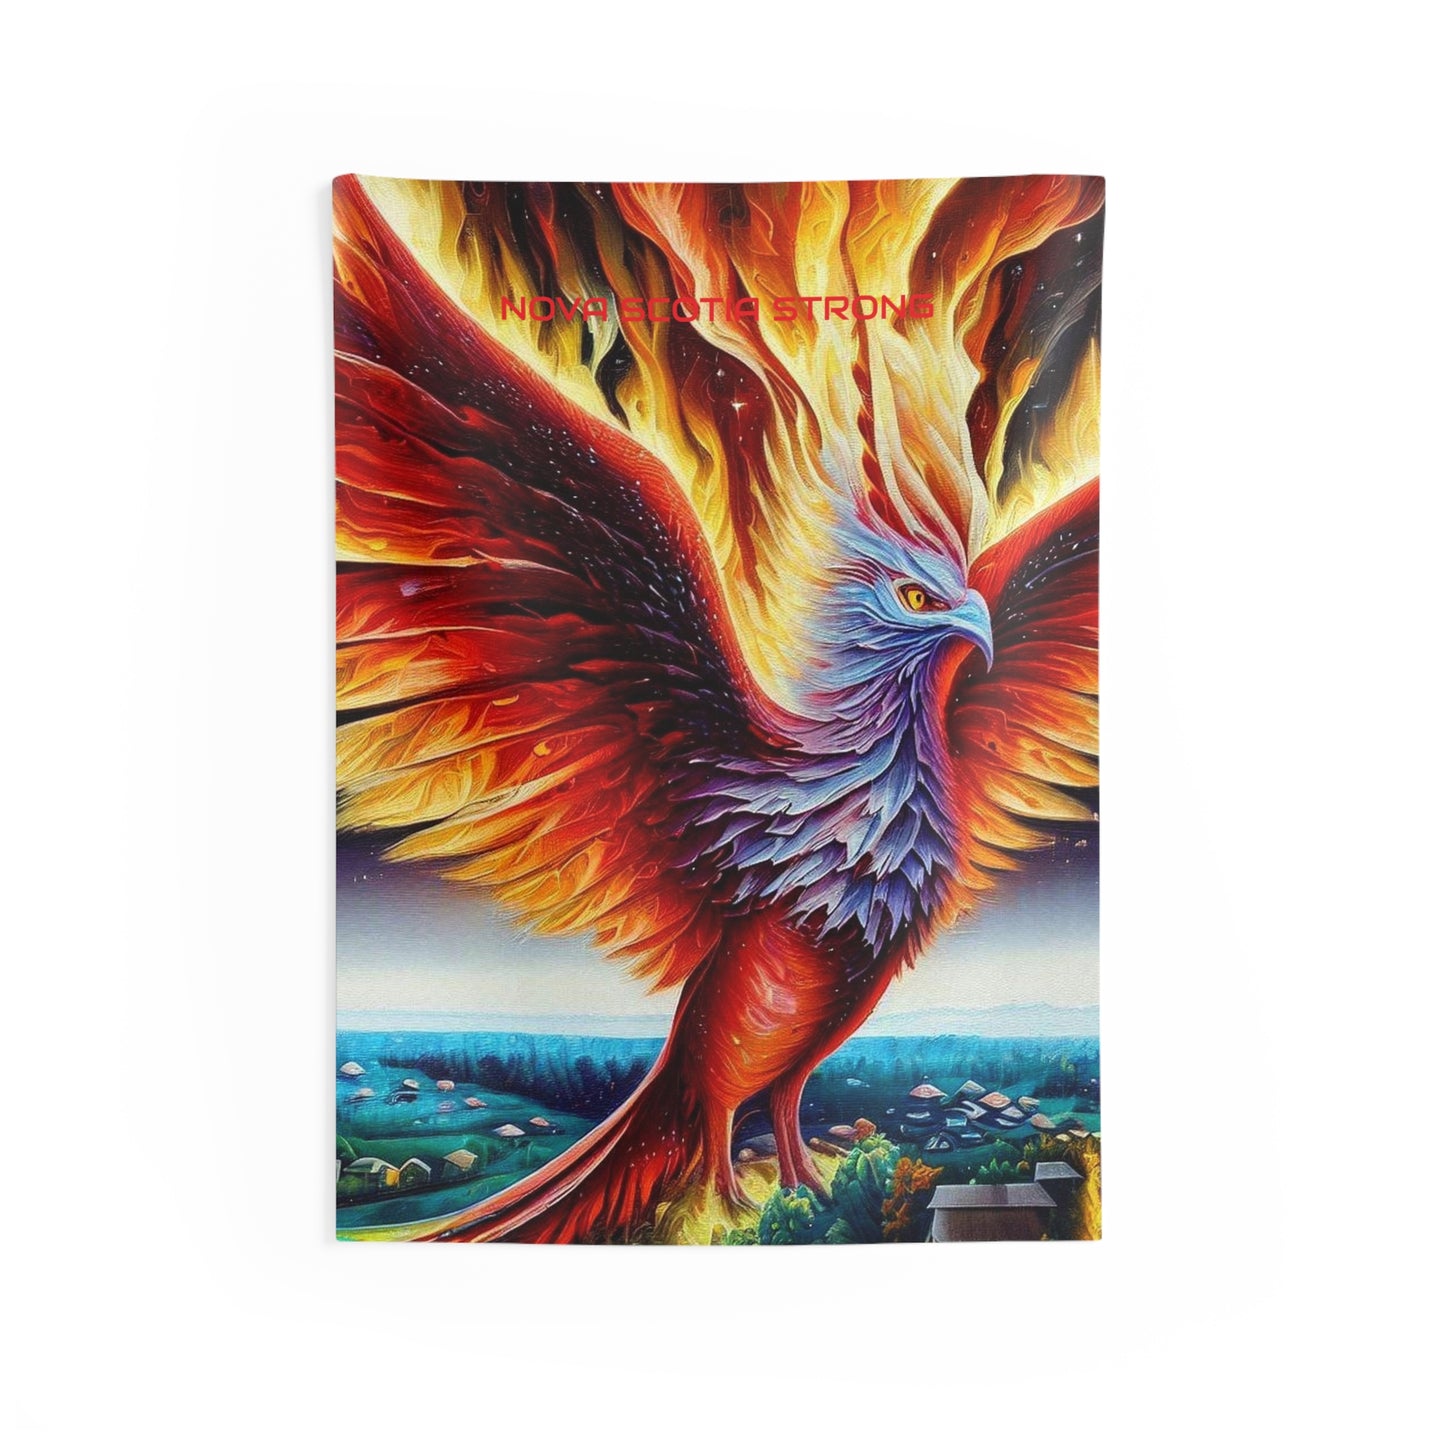 Creative Indoor Phoenix Rising Wall Art Tapestry - Nova Scotia Strong - Wall Decoration Special Edition